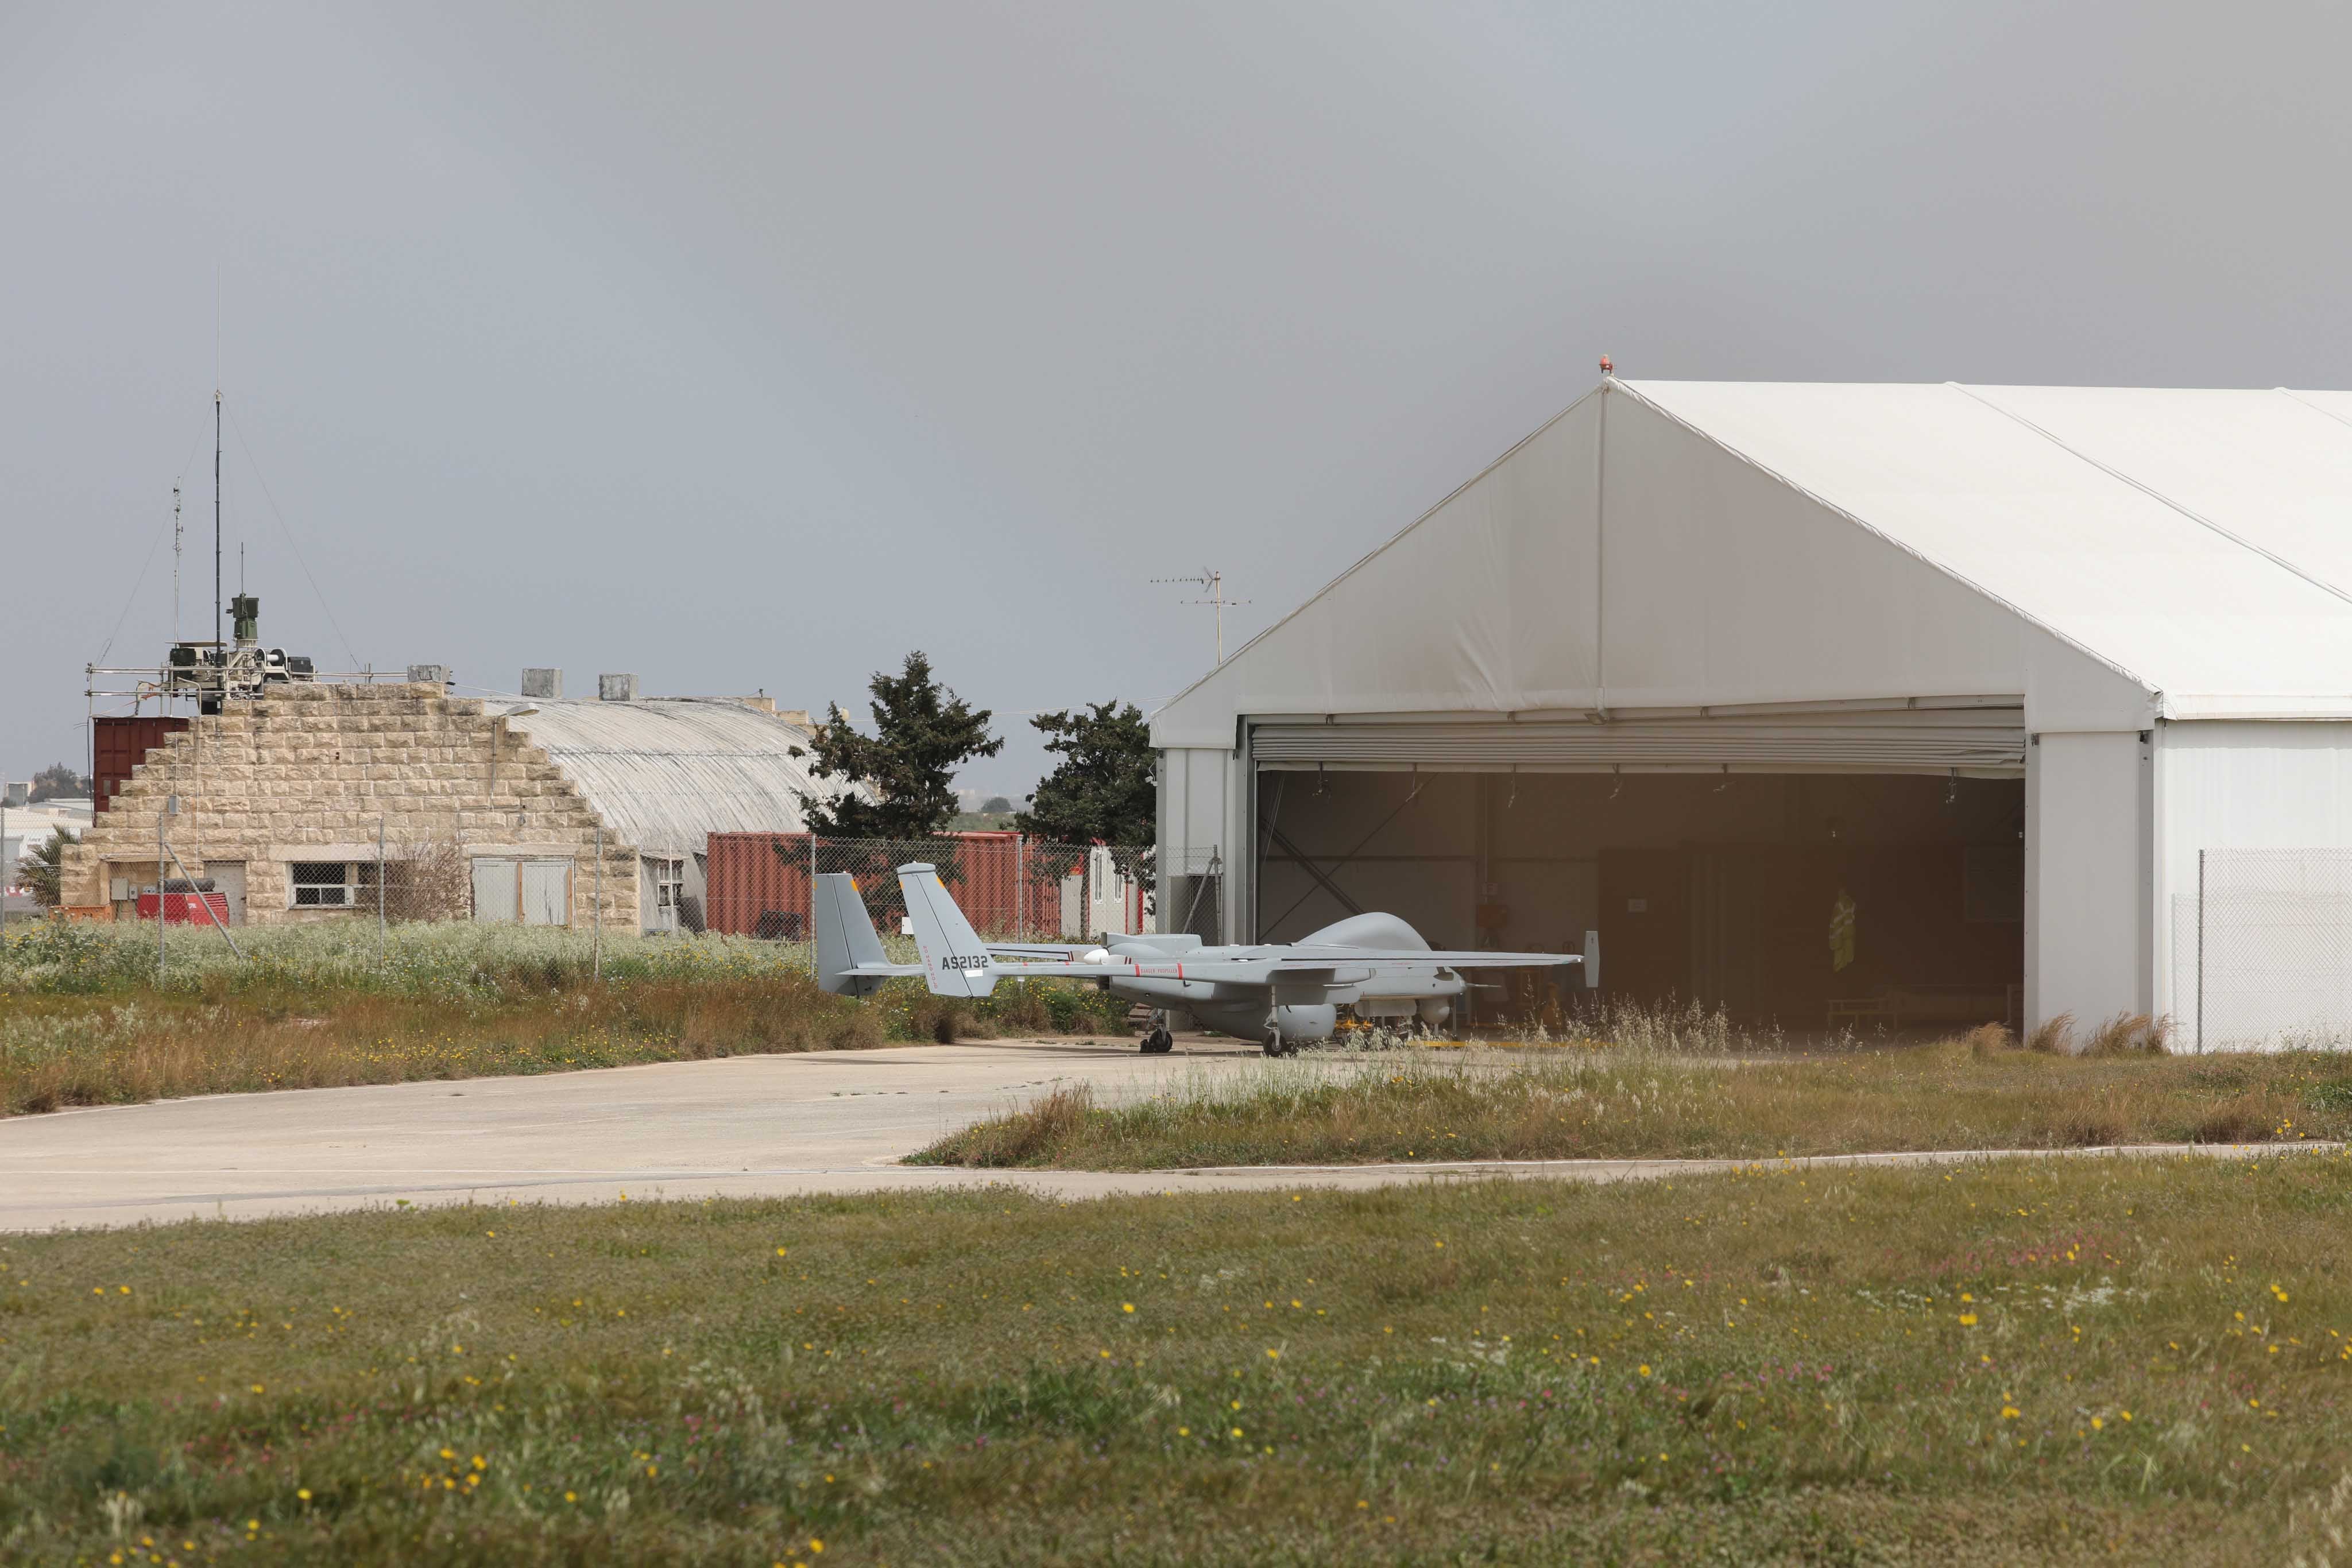 The drone Frontex uses to conduct aerial surveillance in the central Mediterranean Sea in front of its hangar in Malta International Airport, Malta. 